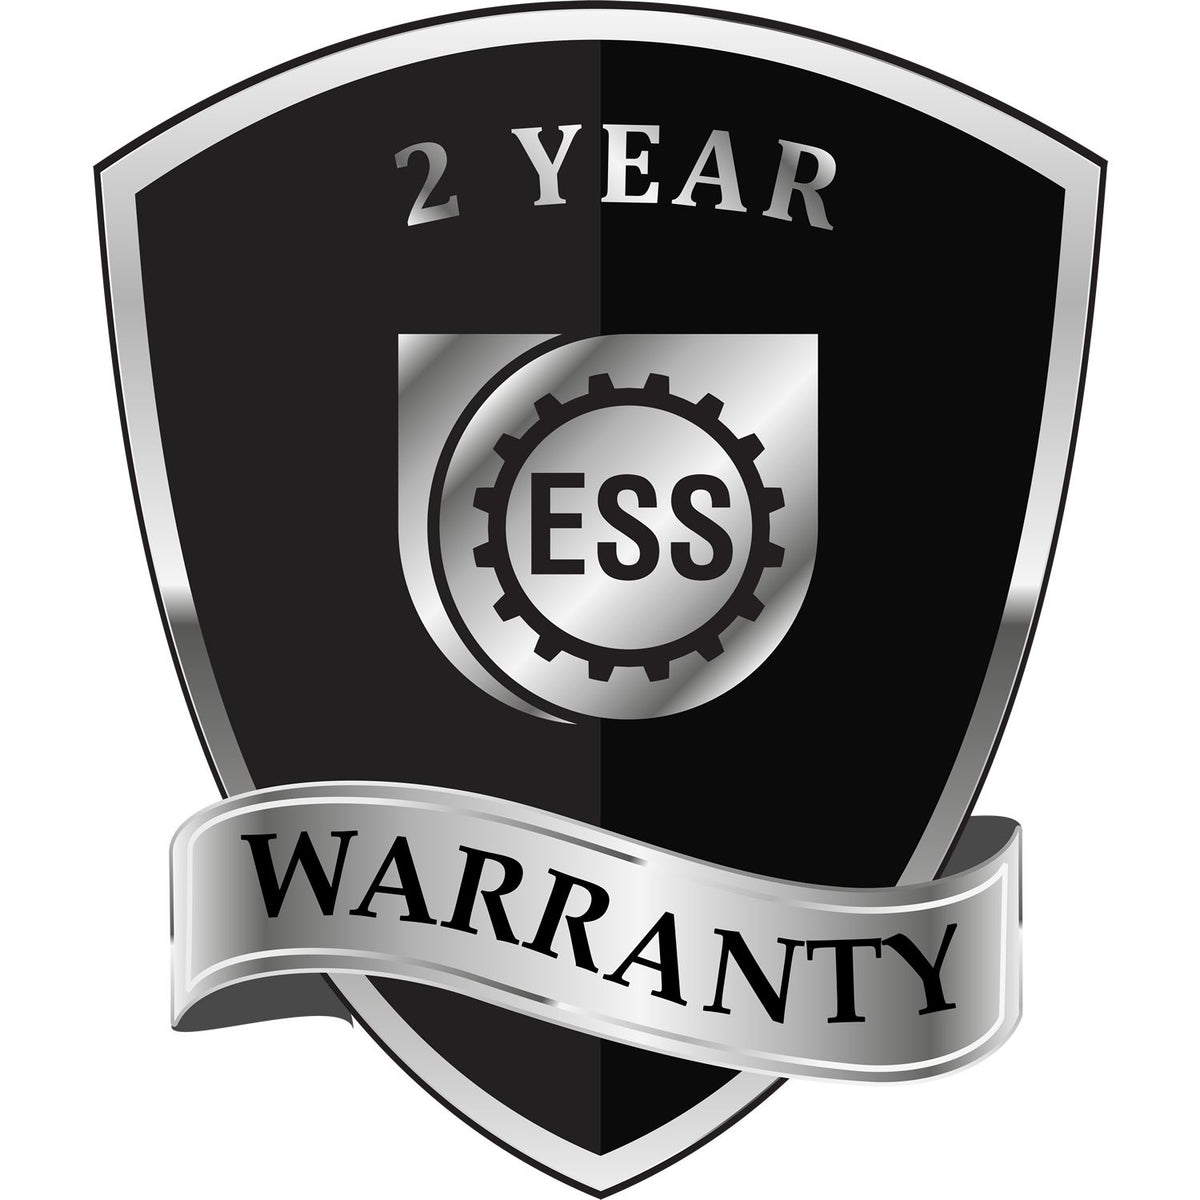 A black and silver badge or emblem showing warranty information for the Gift Missouri Landscape Architect Seal